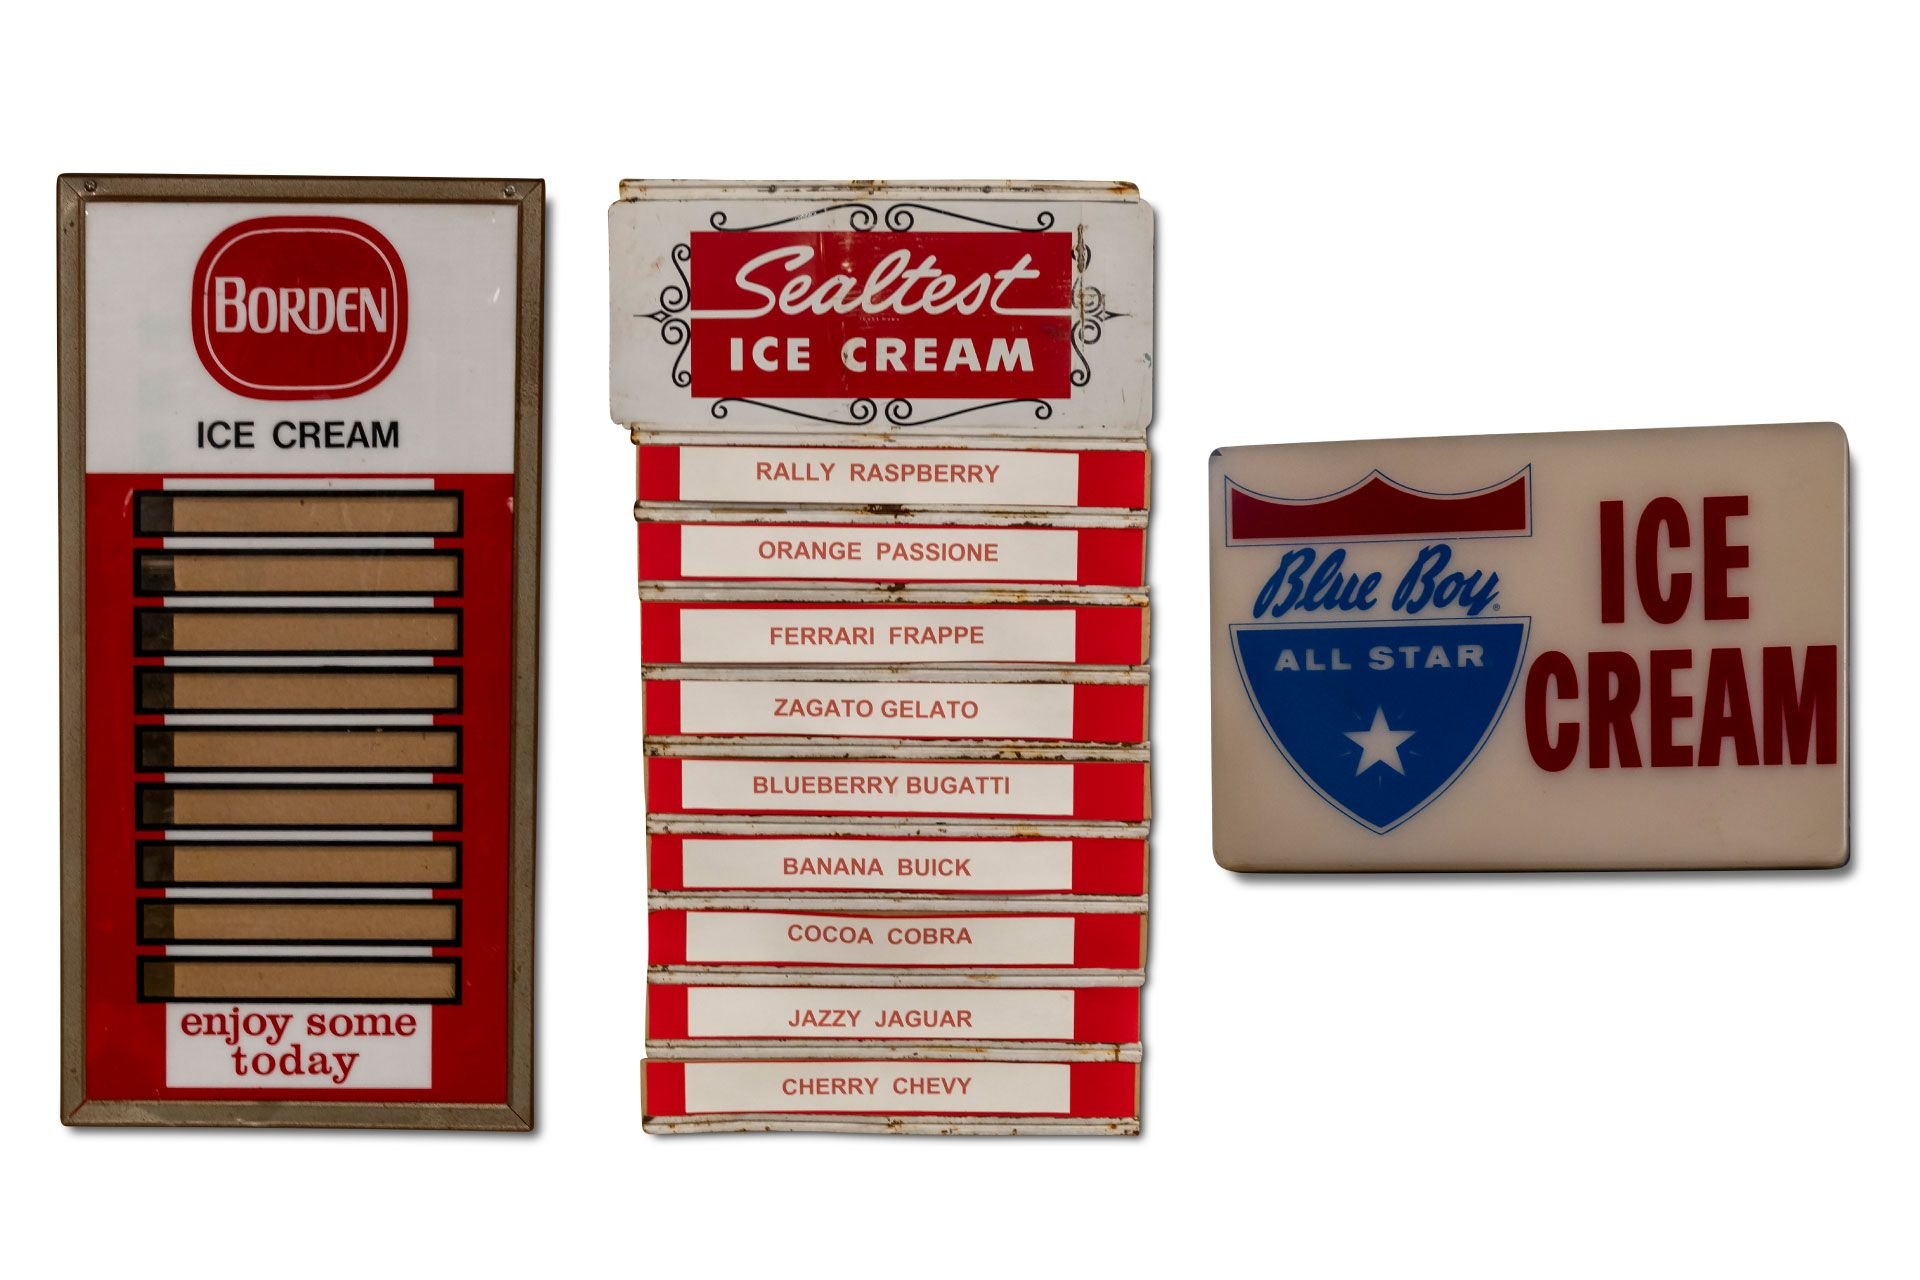 For Sale Group of Ice Cream Signs, 'Blue Boy, Borden, Sealtest'